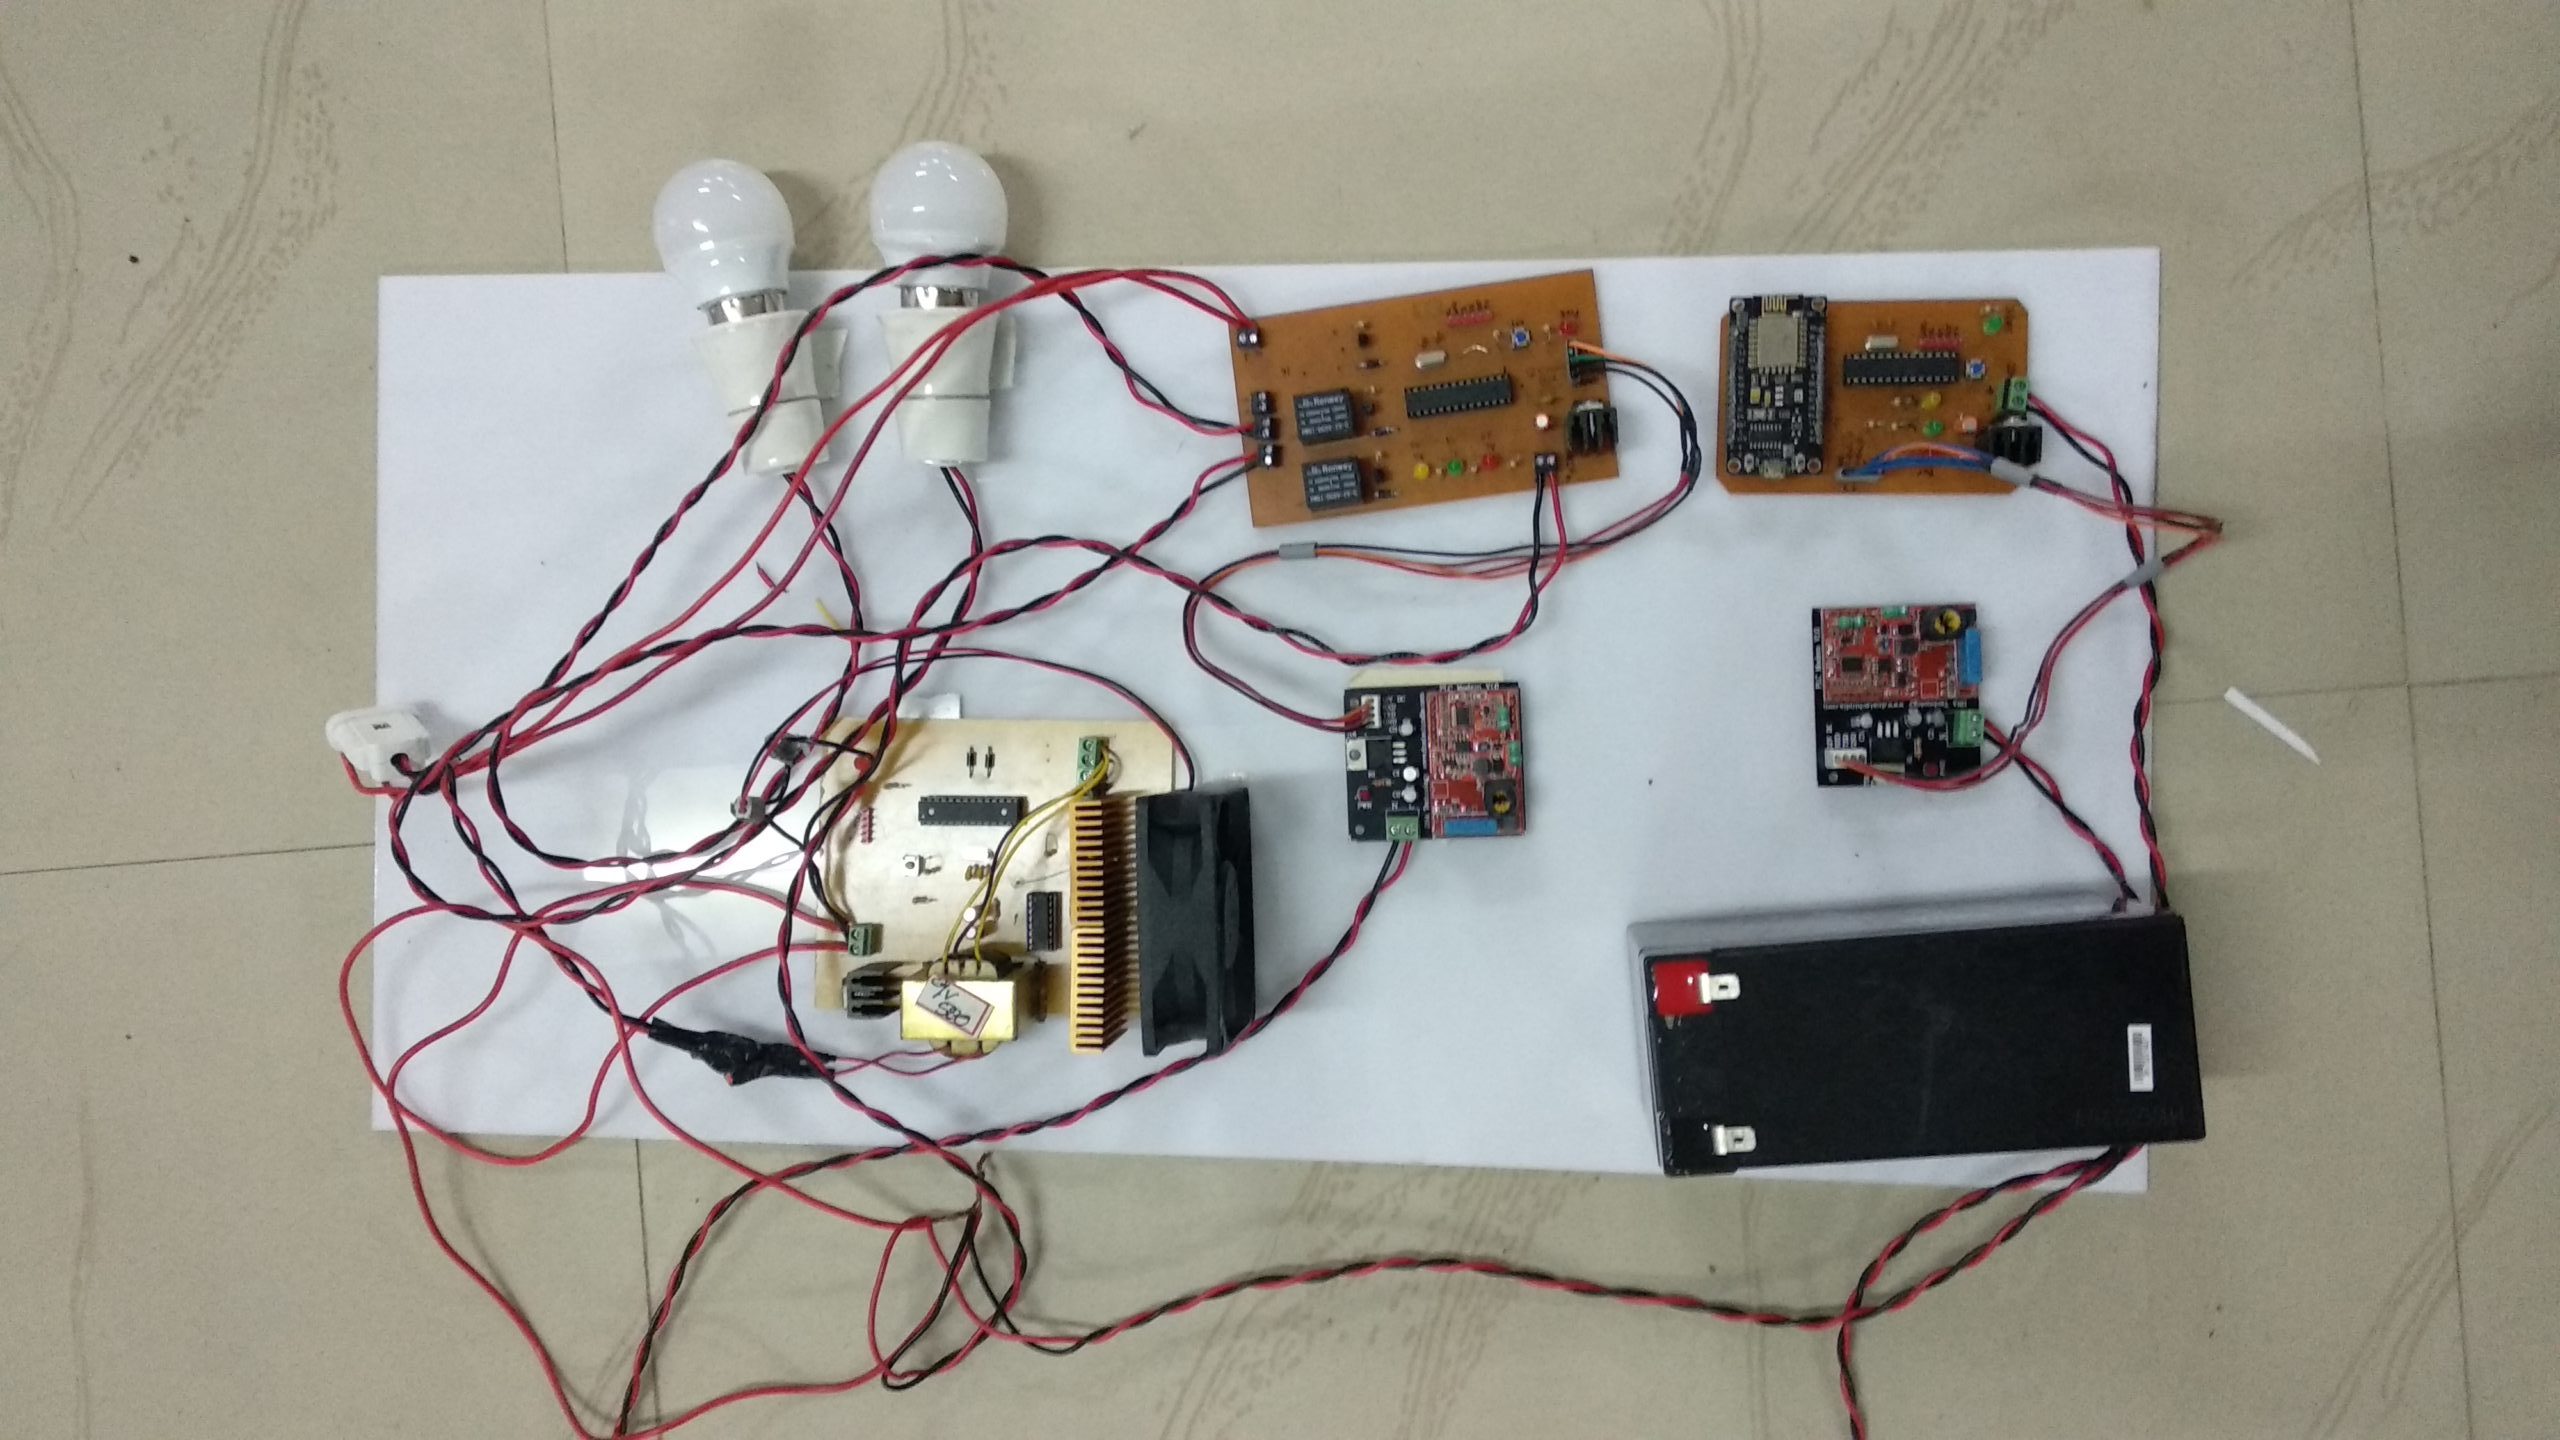 IOT and PLC based home automation system with PV inverter